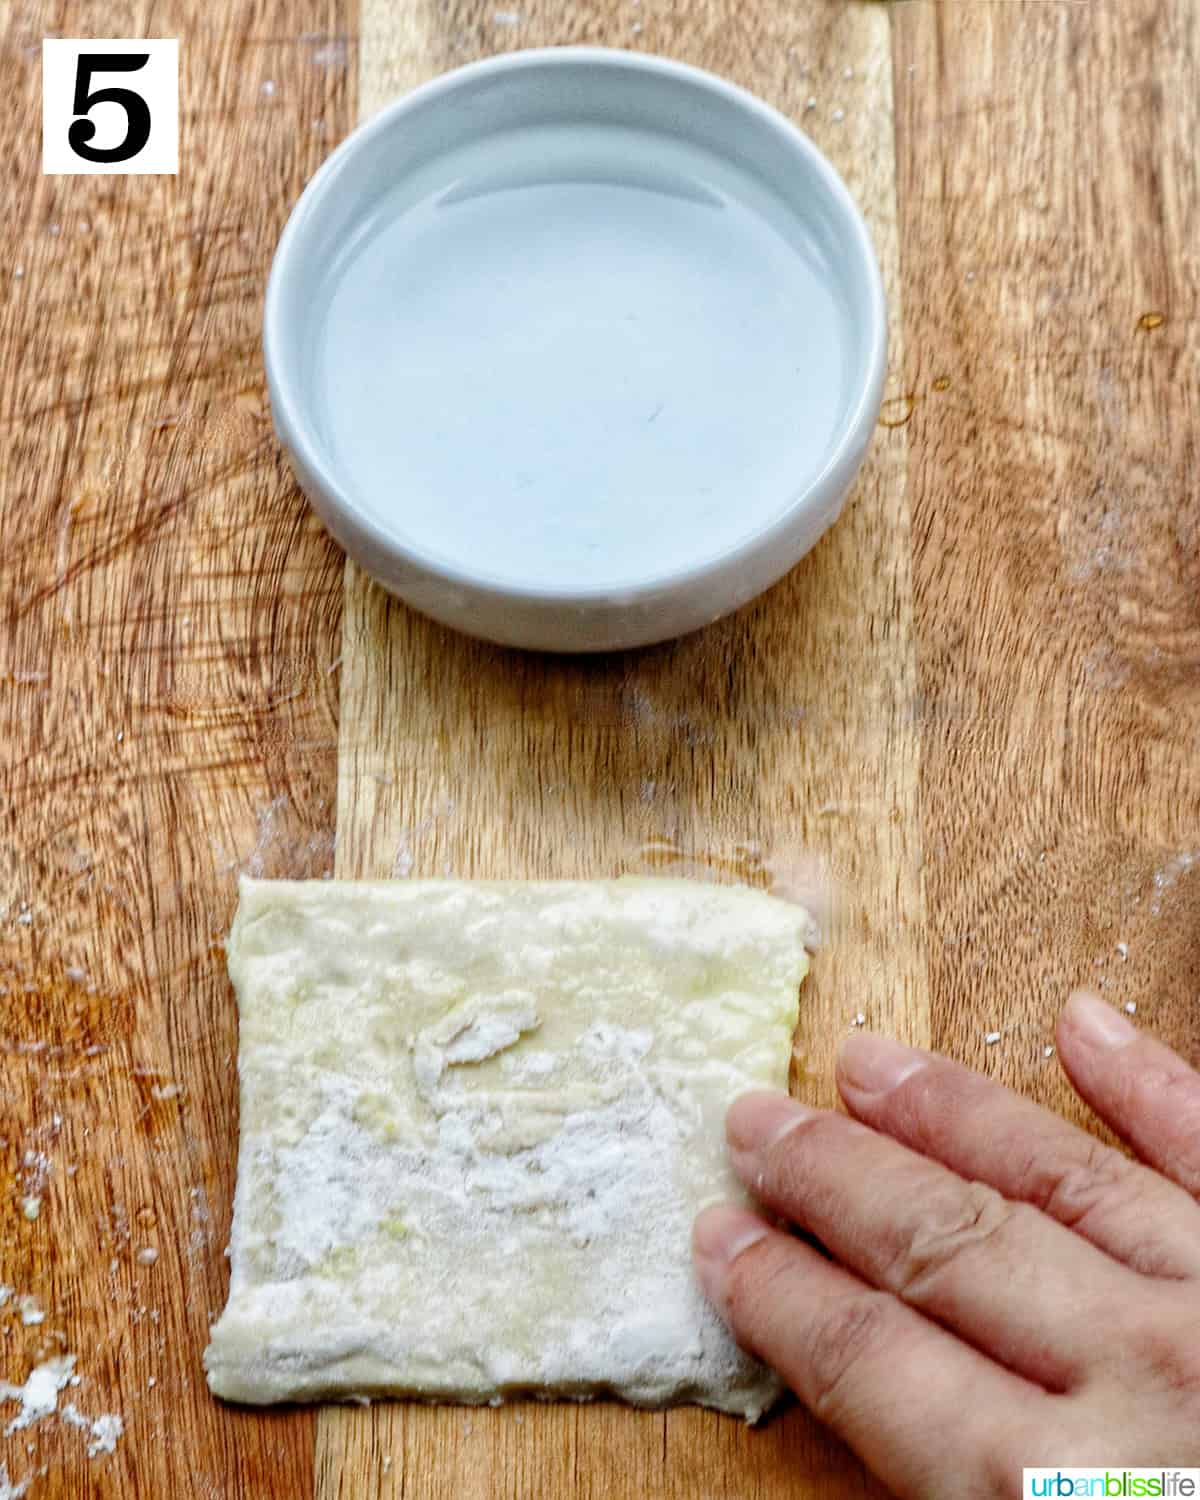 hand placing water around edges of a puff pastry square on cutting board.